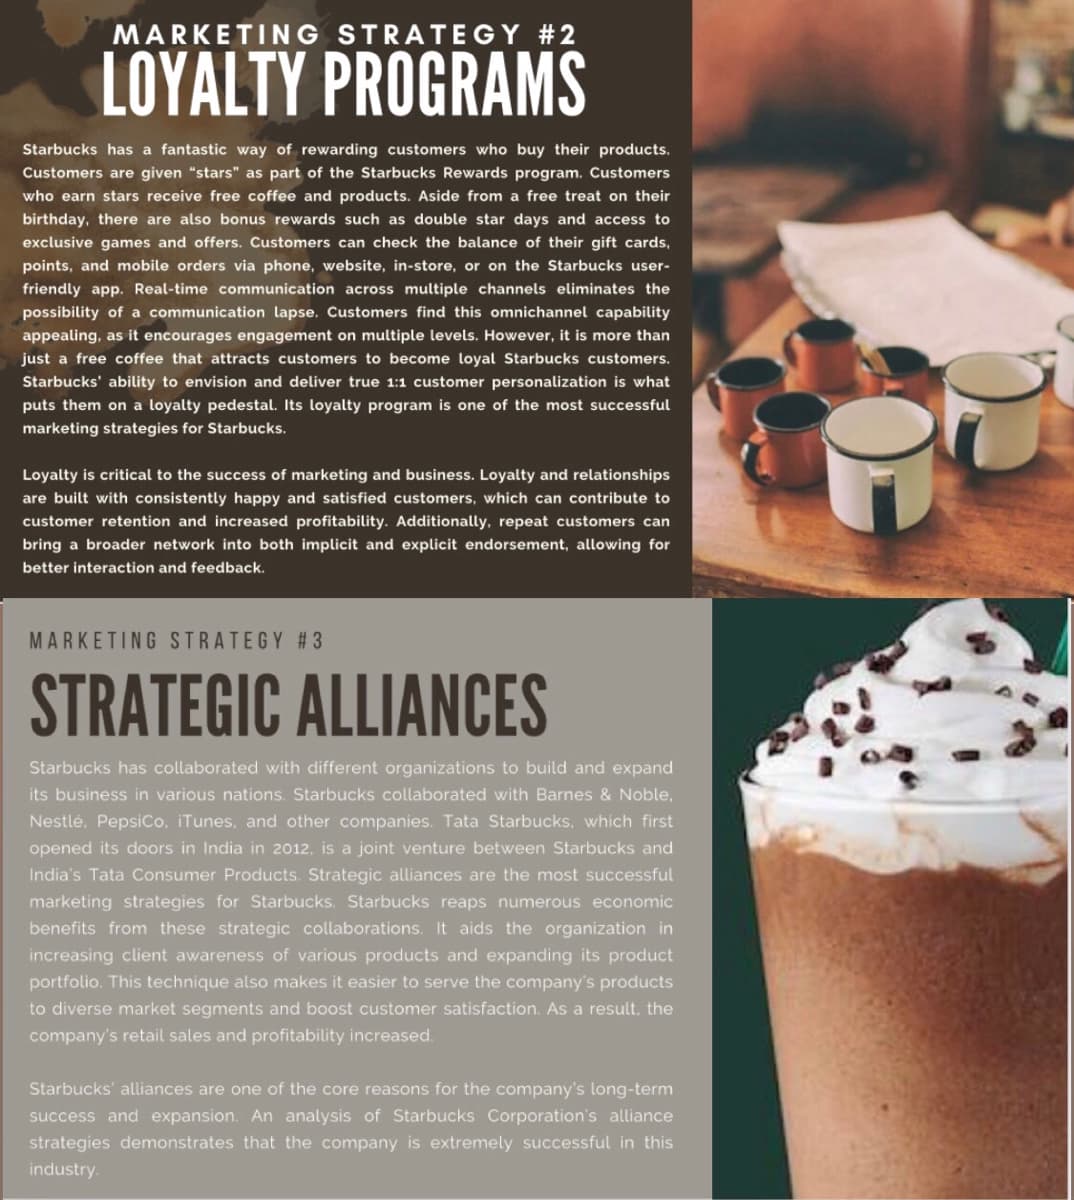 MARKETING STRATEGY #2
LOYALTY PROGRAMS
Starbucks has a fantastic way of rewarding customers who buy their products.
Customers are given "stars" as part of the Starbucks Rewards program. Customers
who earn stars receive free coffee and products. Aside from a free treat on their
birthday, there are also bonus rewards such as double star days and access to
exclusive games and offers. Customers can check the balance of their gift cards,
points, and mobile orders via phone, website, in-store, or on the Starbucks user-
friendly app. Real-time communication across multiple channels eliminates the
possibility of a communication lapse. Customers find this omnichannel capability
appealing, as it encourages engagement on multiple levels. However, it is more than
just a free coffee that attracts customers to become loyal Starbucks customers.
Starbucks' ability to envision and deliver true 1:1 customer personalization is what
puts them on a loyalty pedestal. Its loyalty program is one of the most successful
marketing strategies for Starbucks.
Loyalty is critical to the success of marketing and business. Loyalty and relationships
are built with consistently happy and satisfied customers, which can contribute to
customer retention and increased profitability. Additionally, repeat customers can
bring a broader network into both implicit and explicit endorsement, allowing for
better interaction and feedback.
MARKETING STRATEGY #3
STRATEGIC ALLIANCES
Starbucks has collaborated with different organizations to build and expand
its business in various nations. Starbucks collaborated with Barnes & Noble,
Nestlé, PepsiCo. iTunes, and other companies. Tata Starbucks, which first
opened its doors in India in 2012, is a joint venture between Starbucks and
India's Tata Consumer Products. Strategic alliances are the most successful
marketing strategies for Starbucks. Starbucks reaps numerous economic
benefits from these strategic collaborations. It aids the organization in
increasing client awareness of various products and expanding its product
portfolio. This technique also makes it easier to serve the company's products
to diverse market segments and boost customer satisfaction. As a result, the
company's retail sales and profitability increased.
Starbucks' alliances are one of the core reasons for the company's long-term
success and expansion. An analysis of Starbucks Corporation's alliance
strategies demonstrates that the company is extremely successful in this
industry.